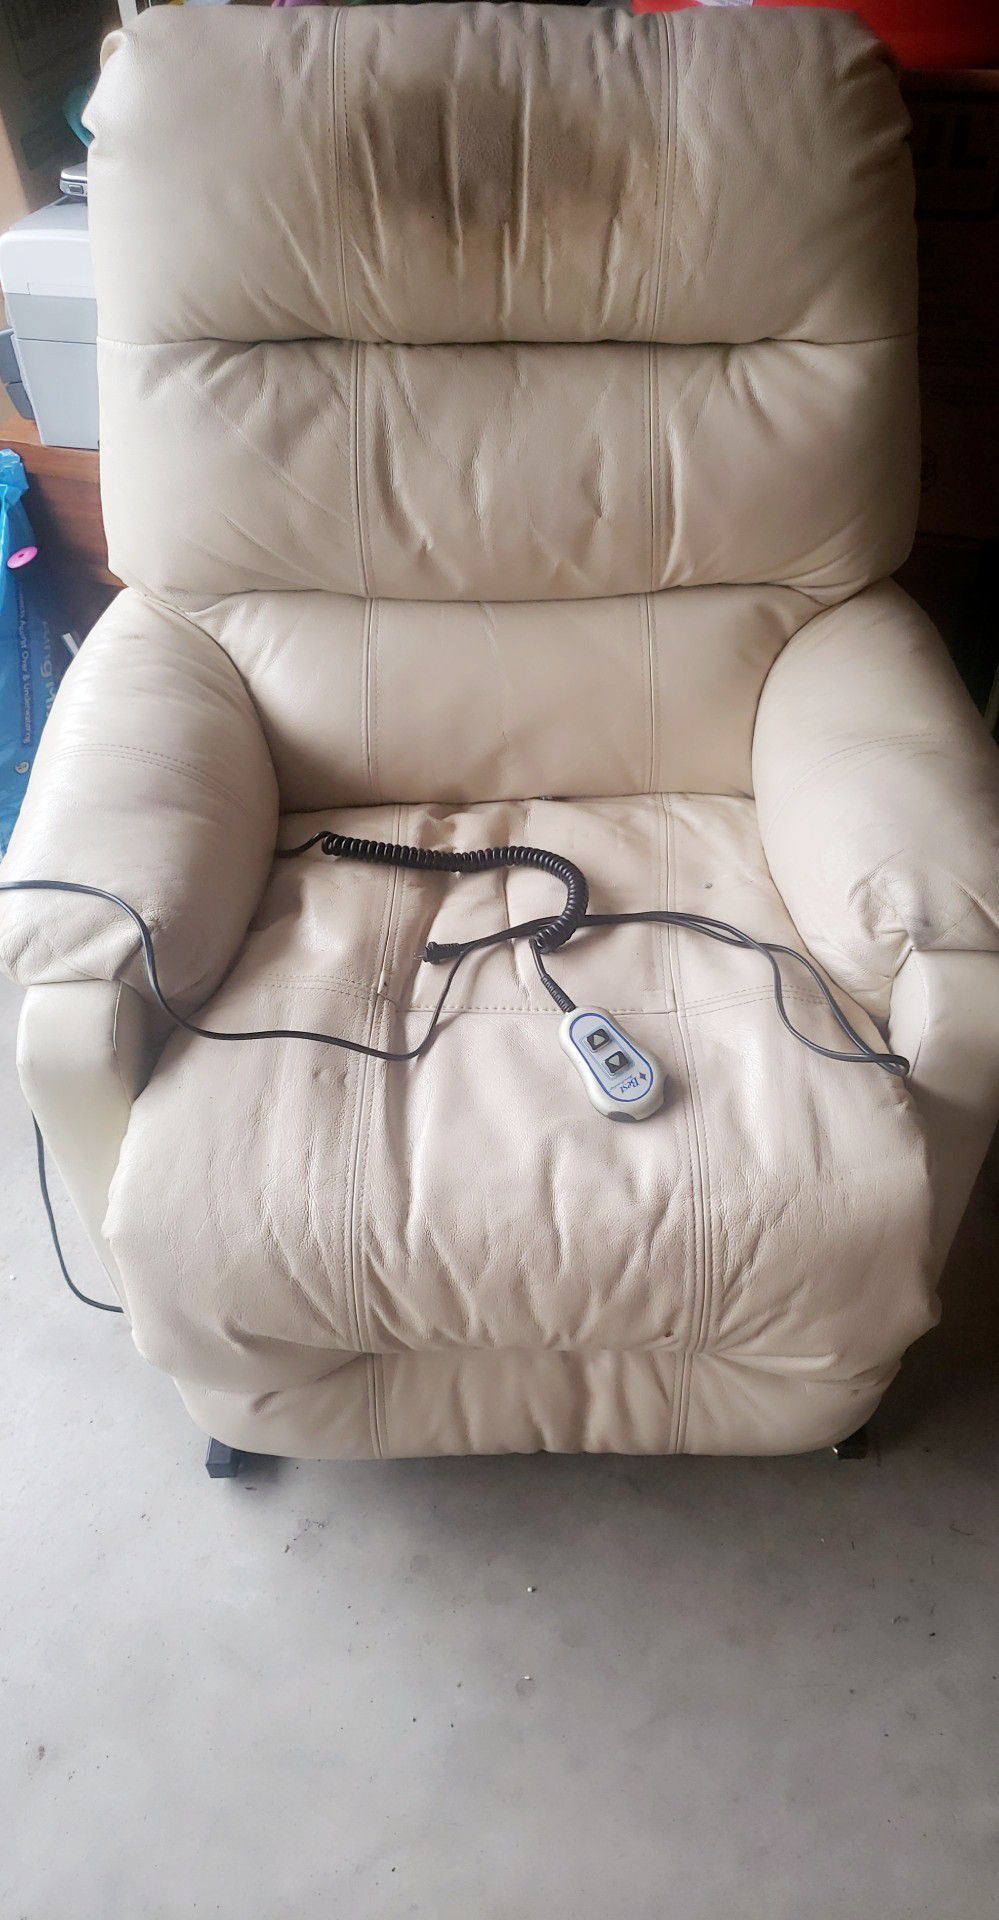 Power Lift chair, missing battery pack